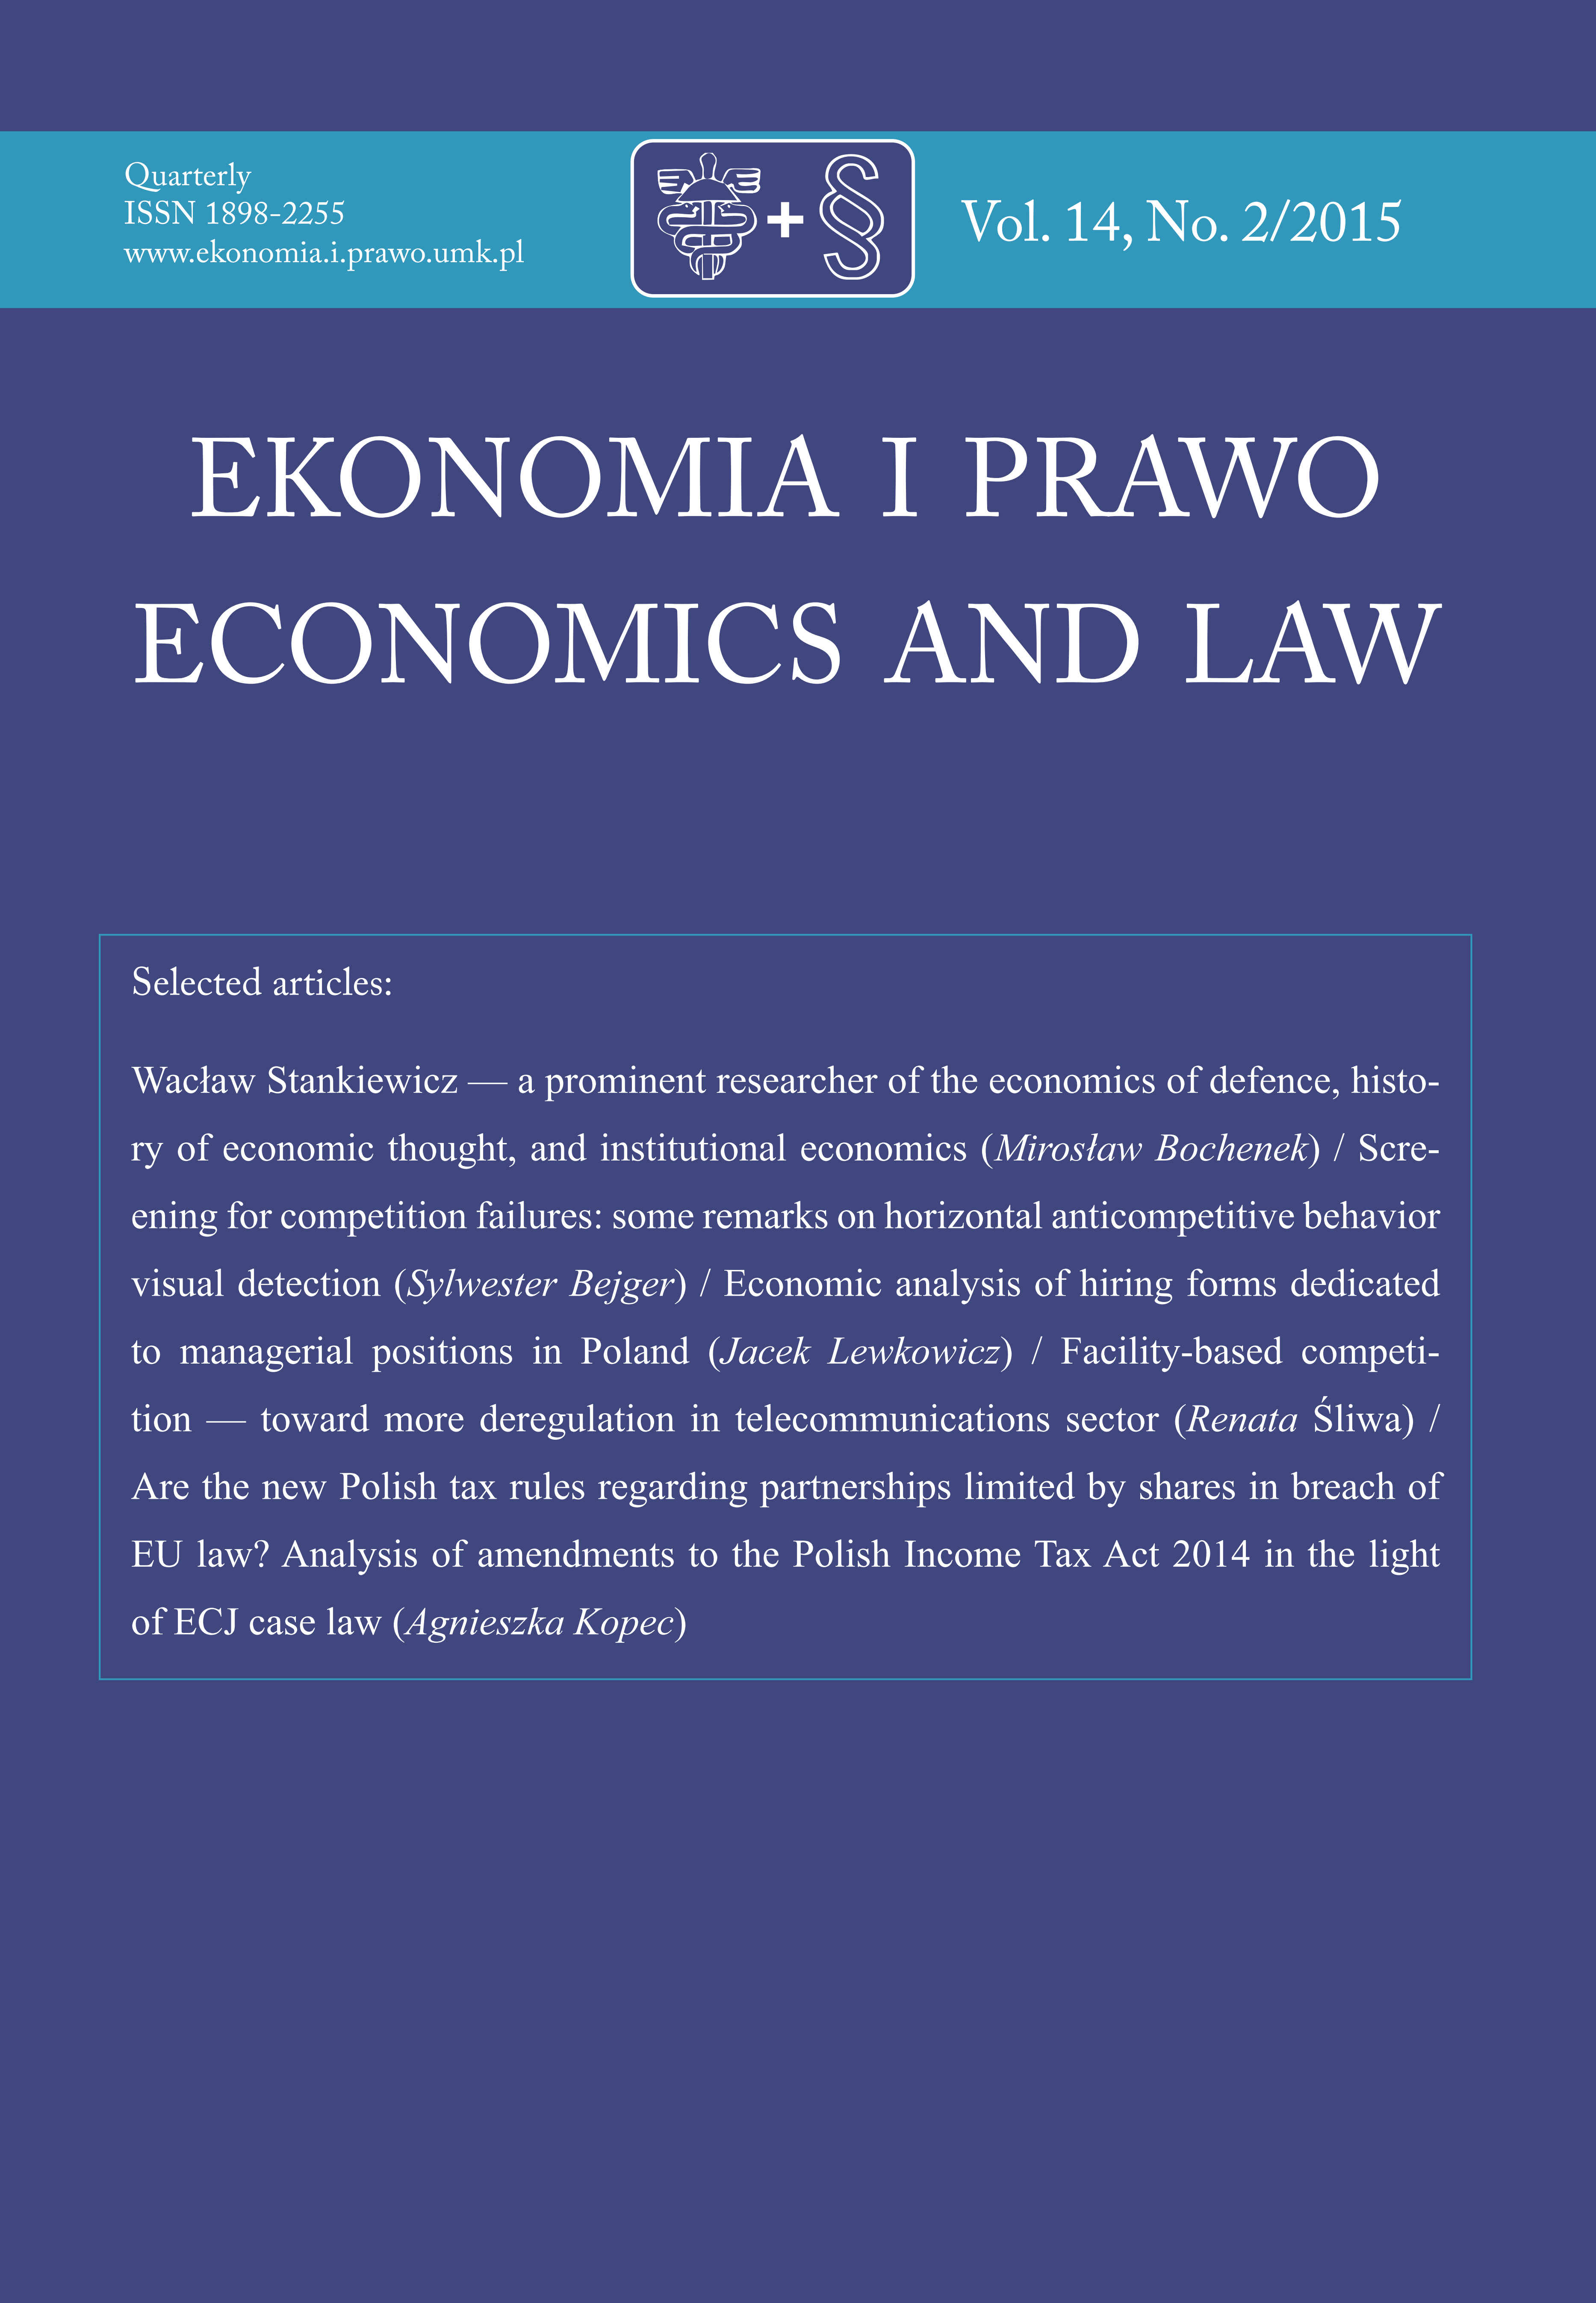 ARE THE NEW POLISH TAX RULES REGARDING PARTNERSHIPS LIMITED BY SHARES IN BREACH OF EU LAW? ANALYSIS OF AMENDMENTS TO THE POLISH INCOME TAX ACT 2014 IN THE LIGHT OF ECJ CASE LAW Cover Image